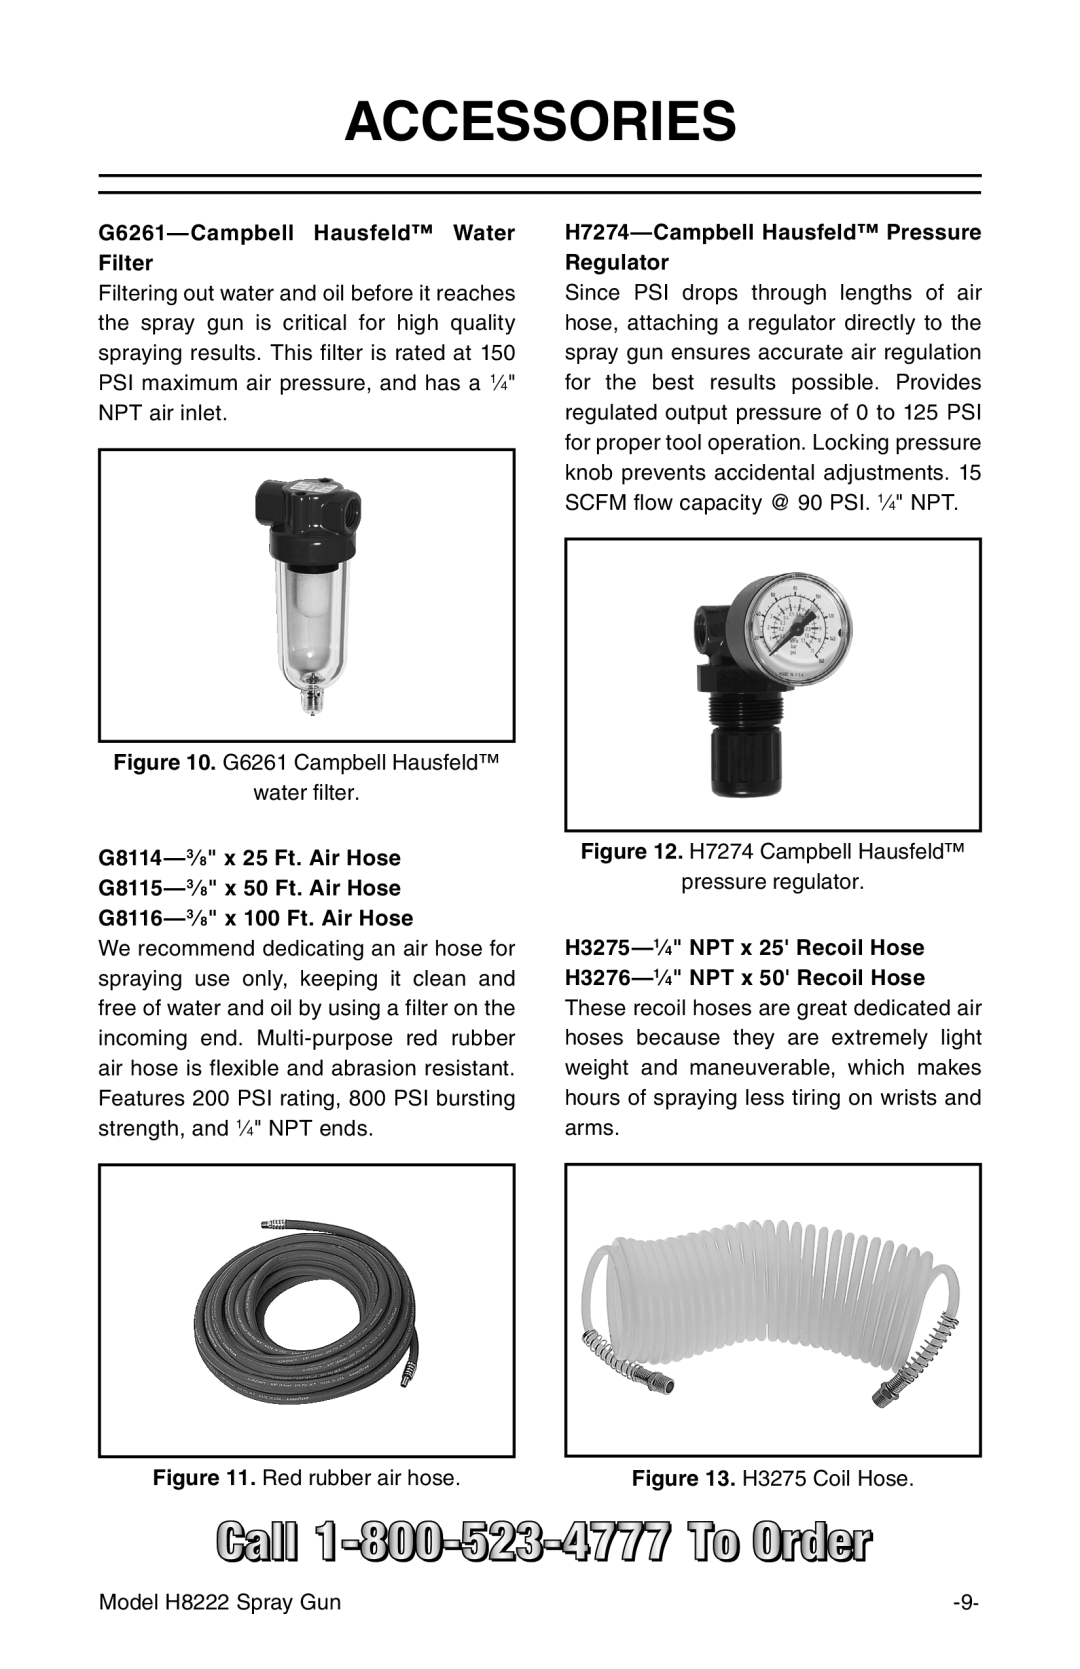 Grizzly Model H8222 instruction manual Accessories, G6261-Campbell Hausfeld Water Filter, G8116-3⁄8 x 100 Ft. Air Hose 